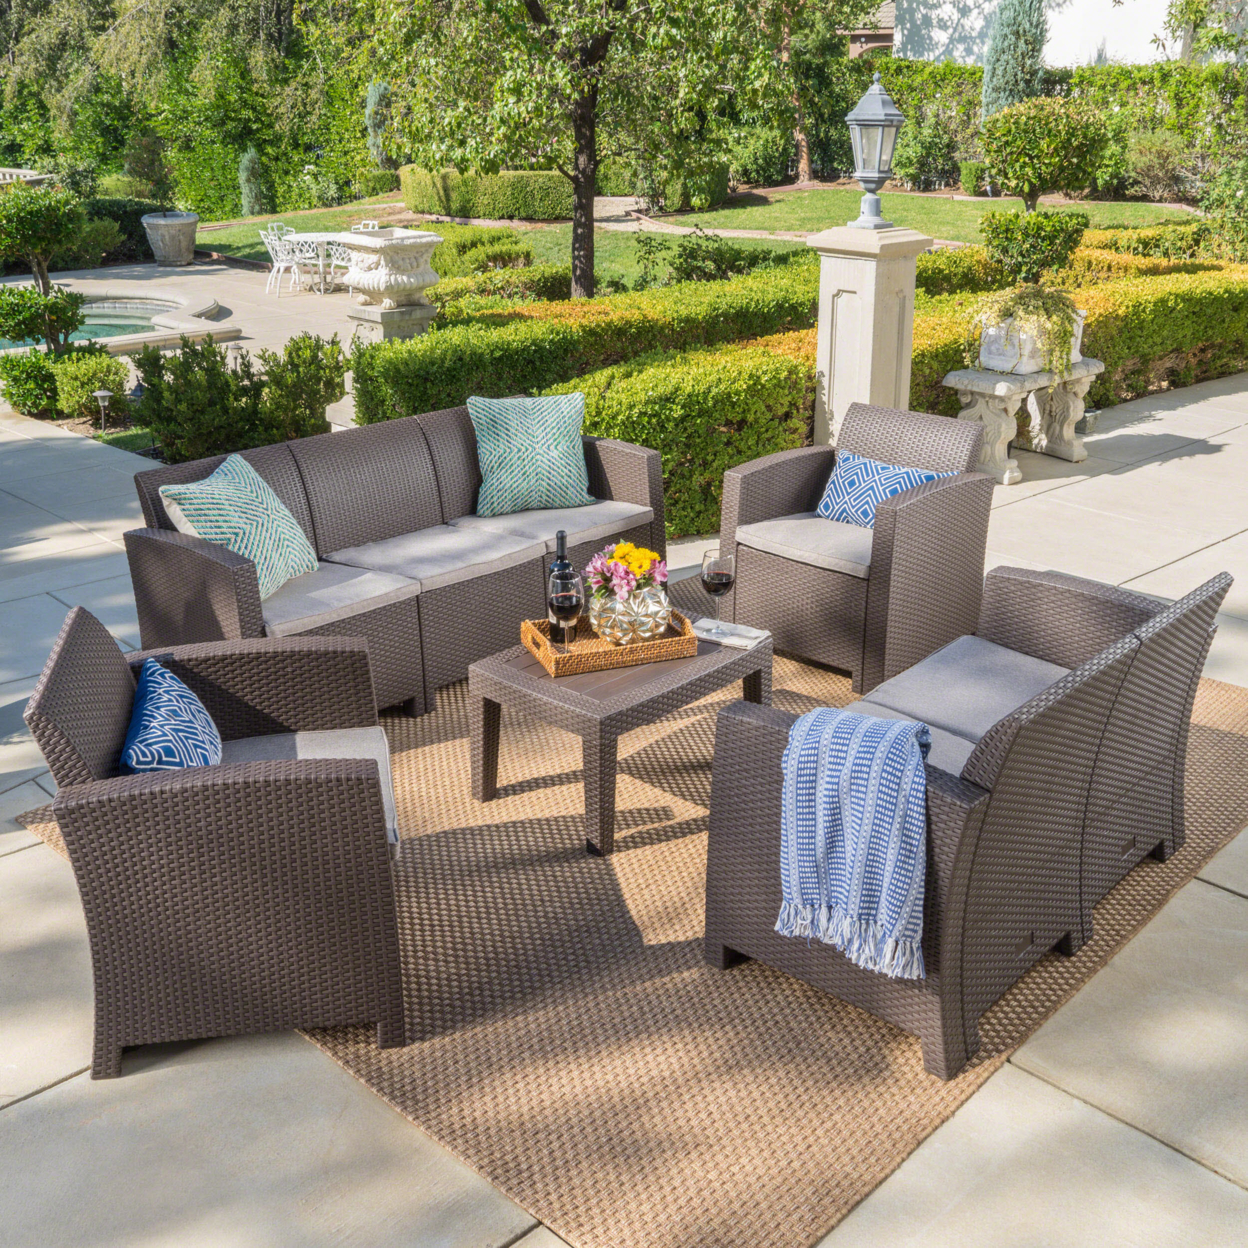 Dayton Outdoor 5 Piece Faux Wicker Rattan Chat Set With Sofa And Water Resistant Cushions - Brown/Mix Beige